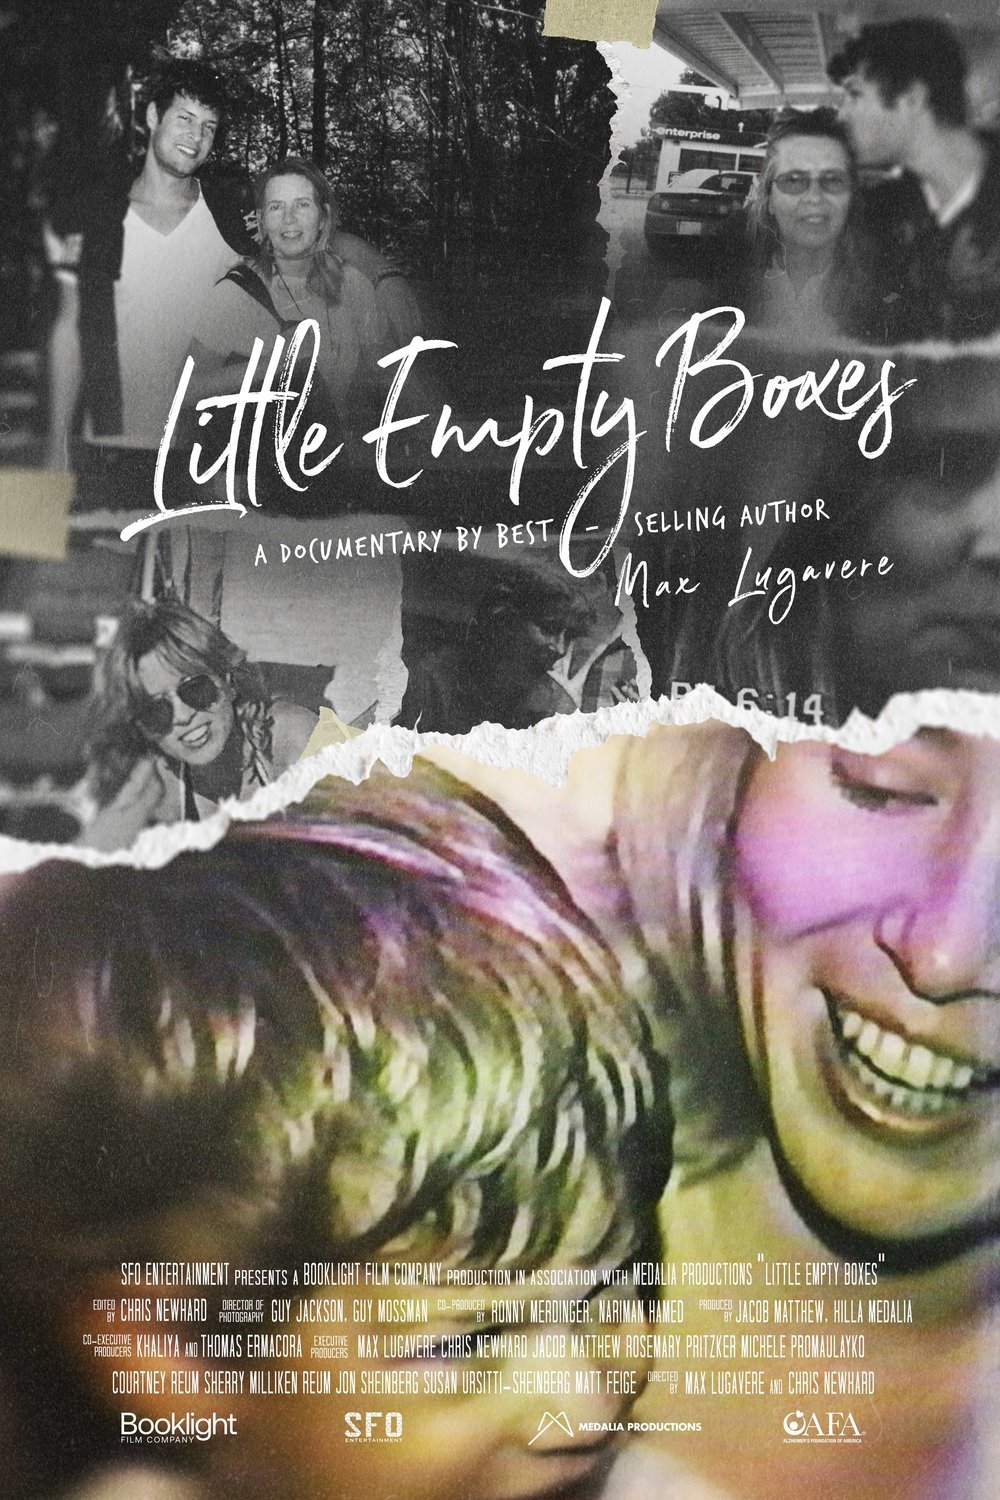 Poster of the movie Little Empty Boxes